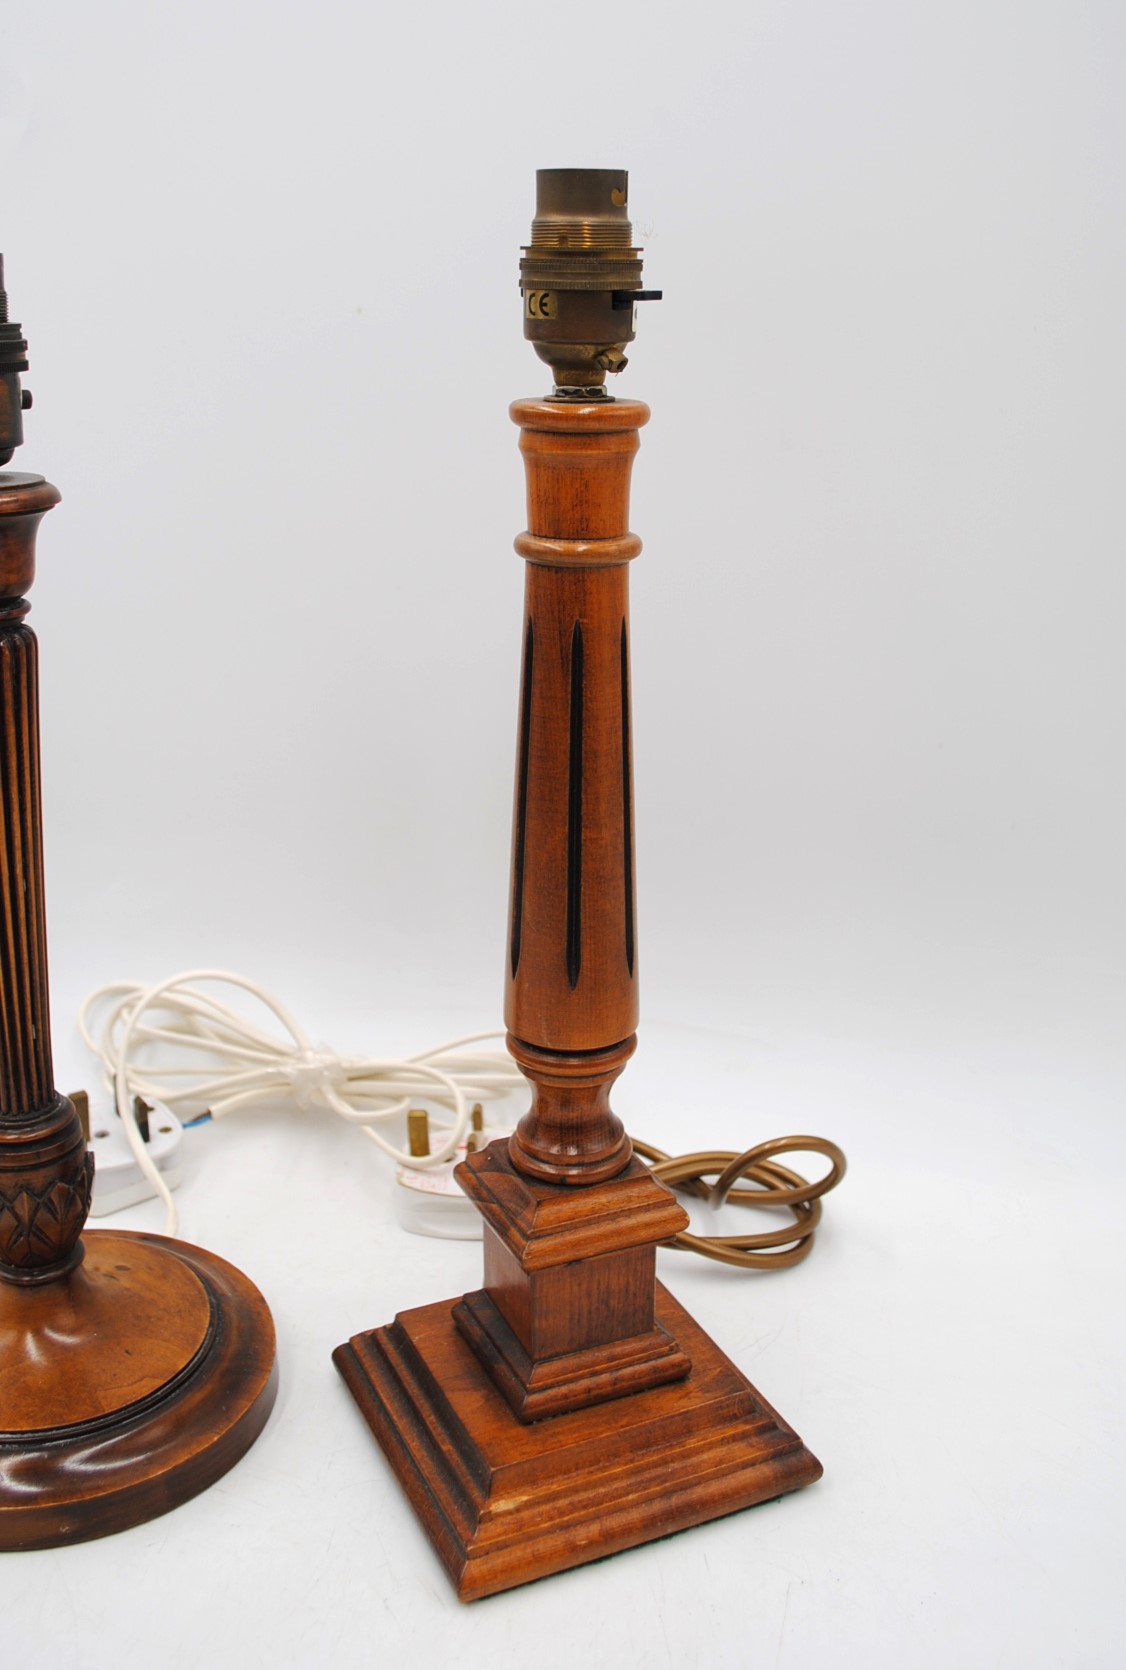 A wooden table lamp with fluted column decoration, along with another wooden table lamp - Image 2 of 3